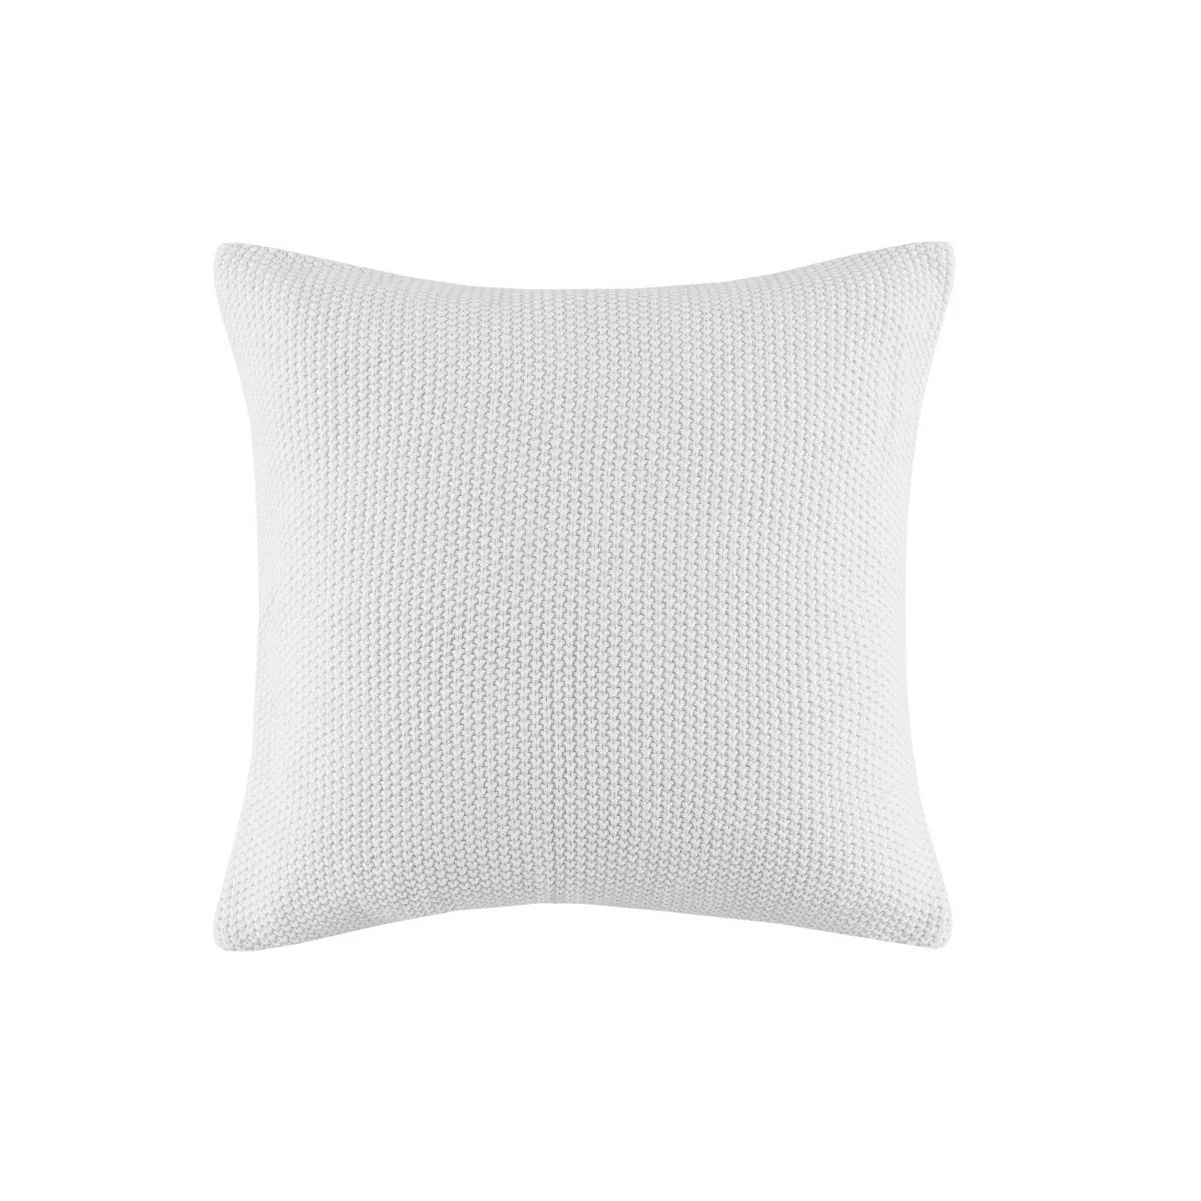 Bree Knit Throw Pillow Cover | Target